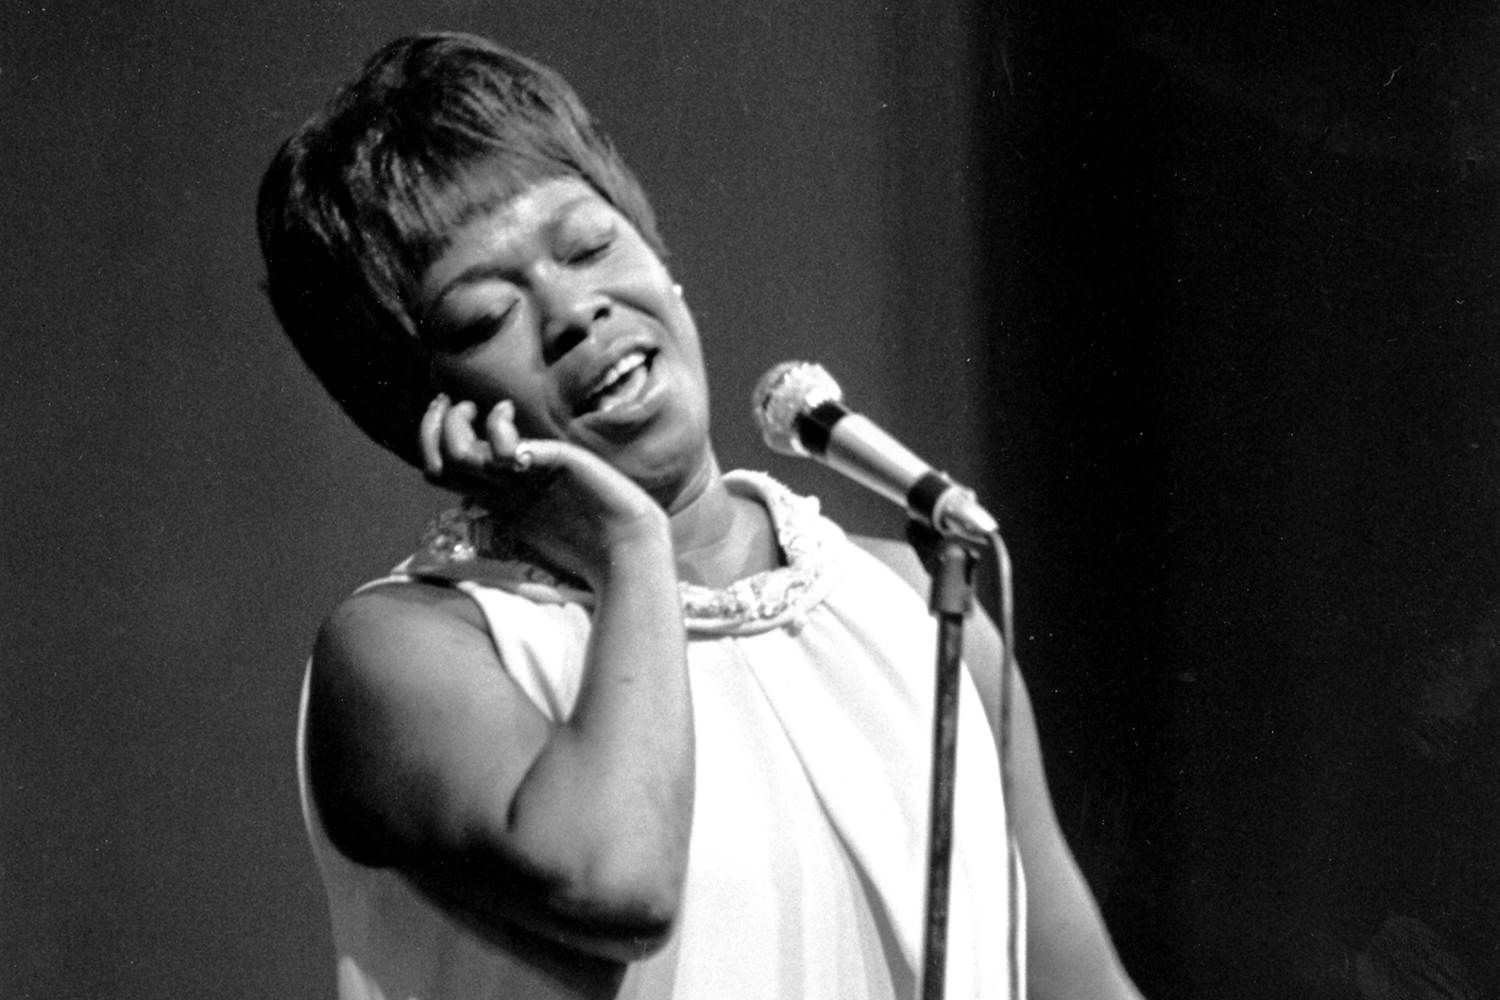 II. Sarah Vaughan's Early Life and Musical Journey